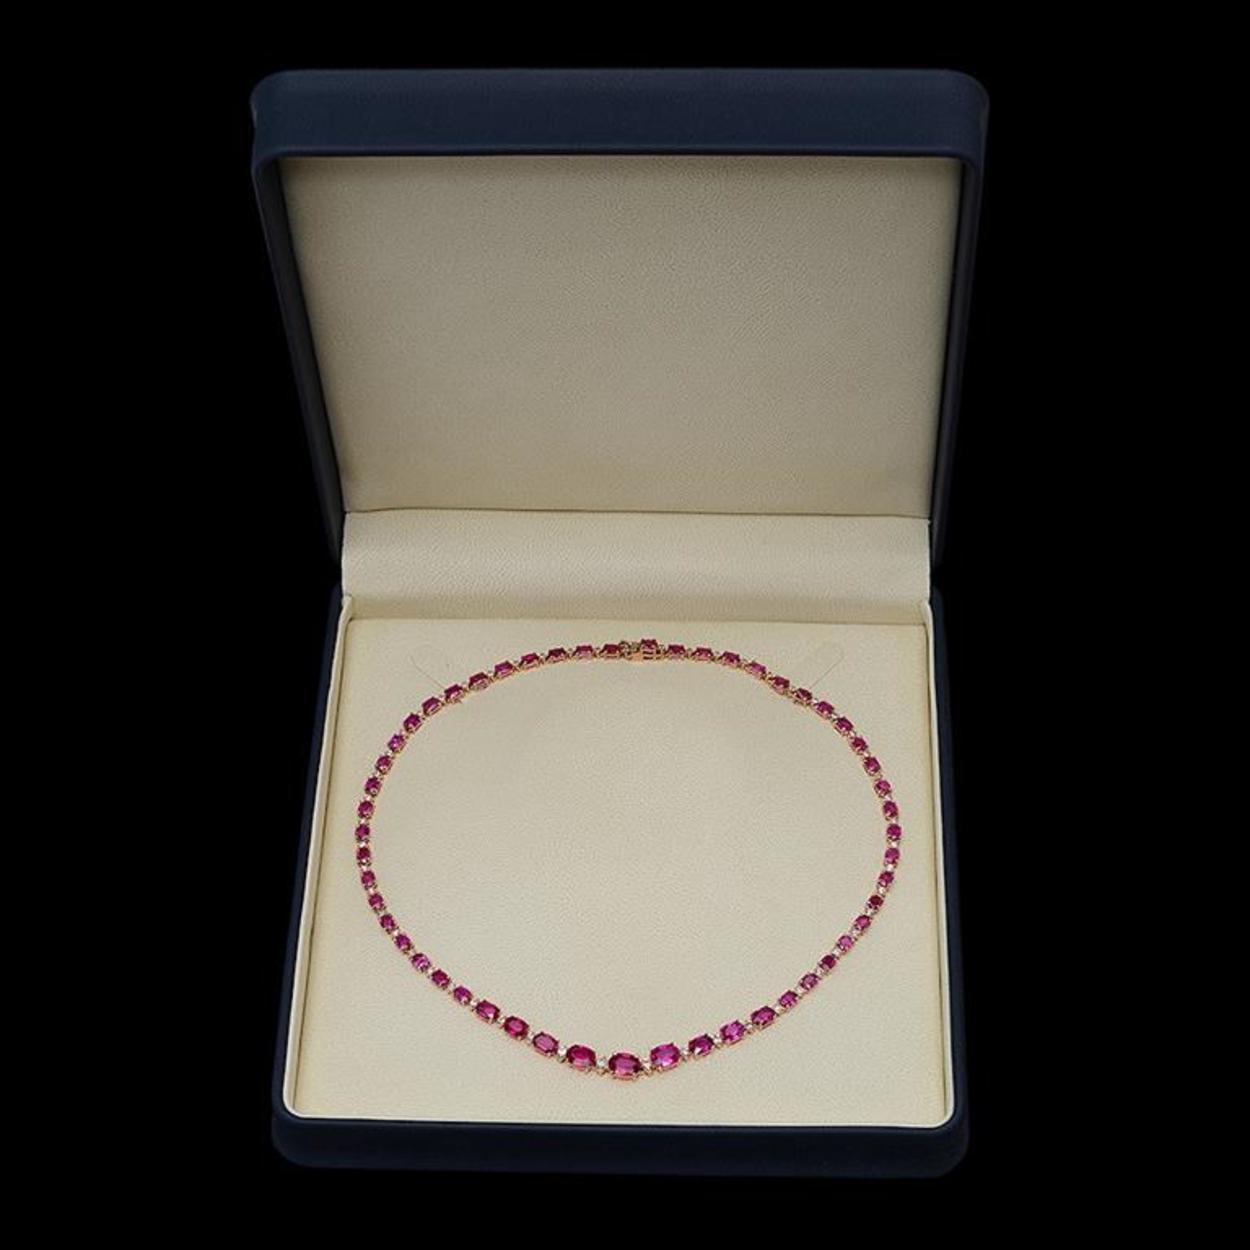 14K Gold 28.84ct Ruby & 1.70ct Diamond Necklace